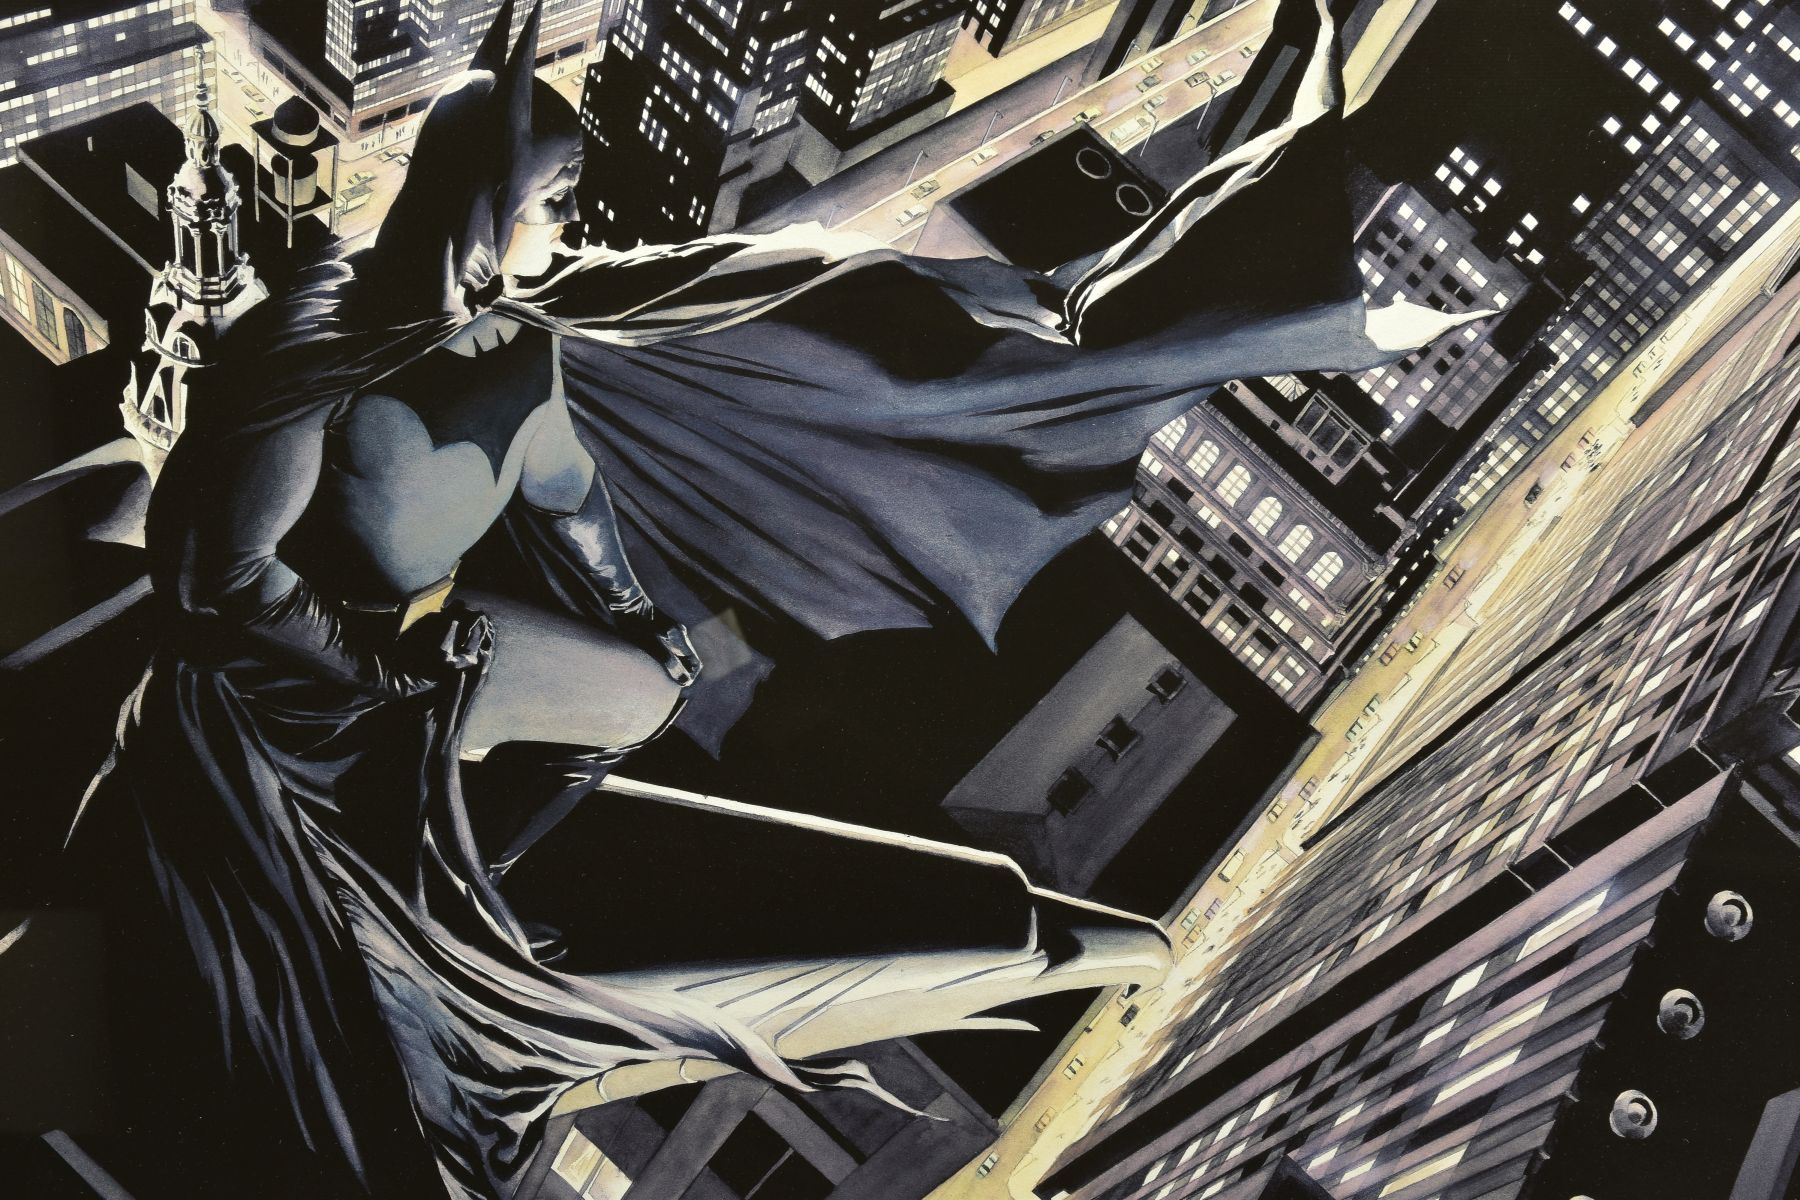 ALEX ROSS (AMERICAN CONTEMPORY) 'BATMAN: KNIGHT OVER GOTHAM', a signed limited edition print of - Image 3 of 10